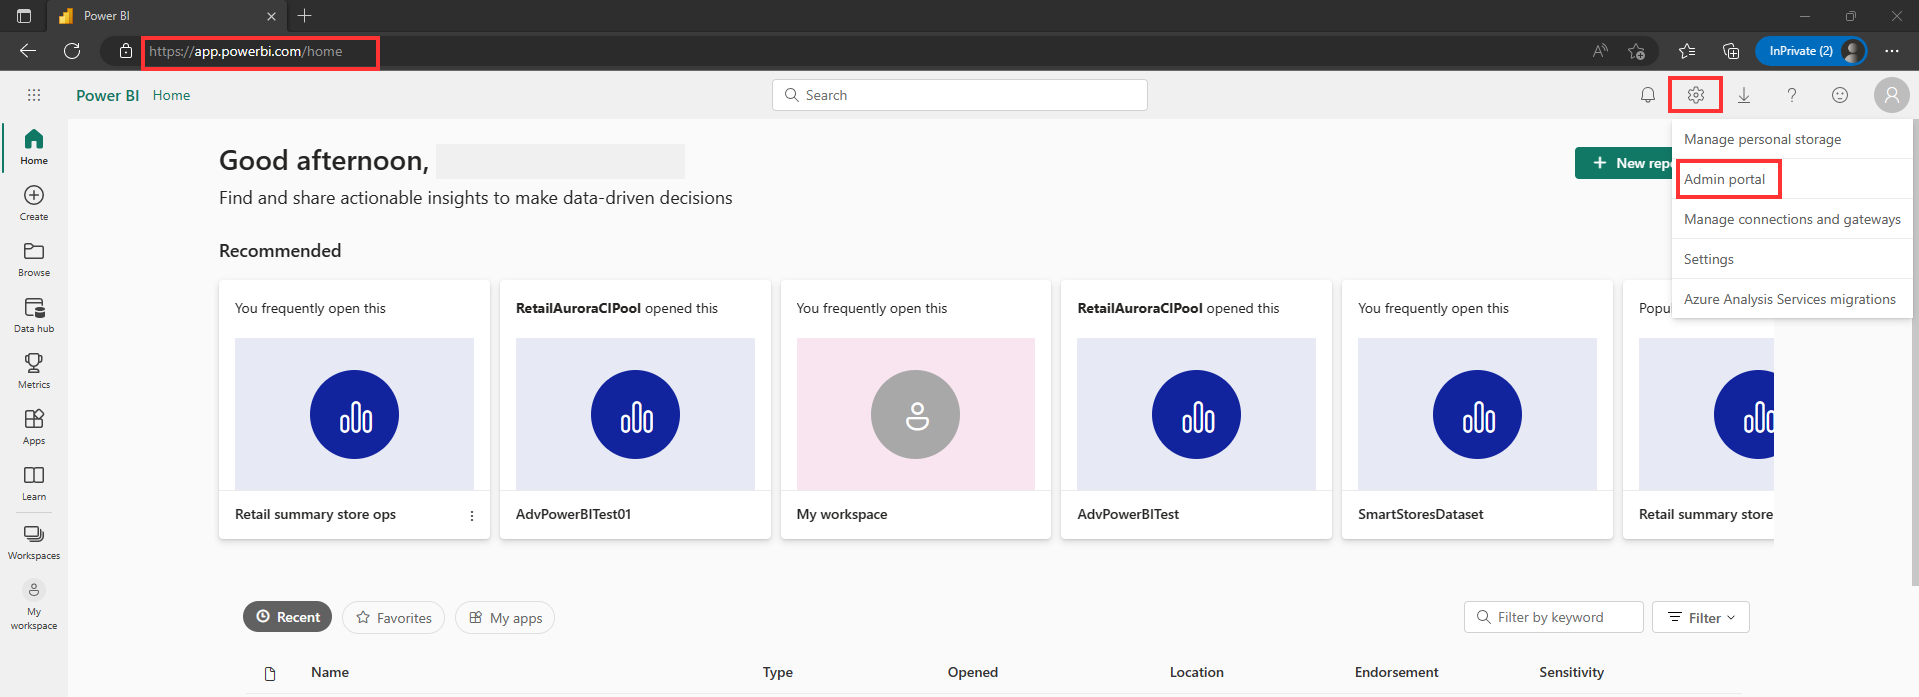 The image shows how to admin portal in power platform admin center.